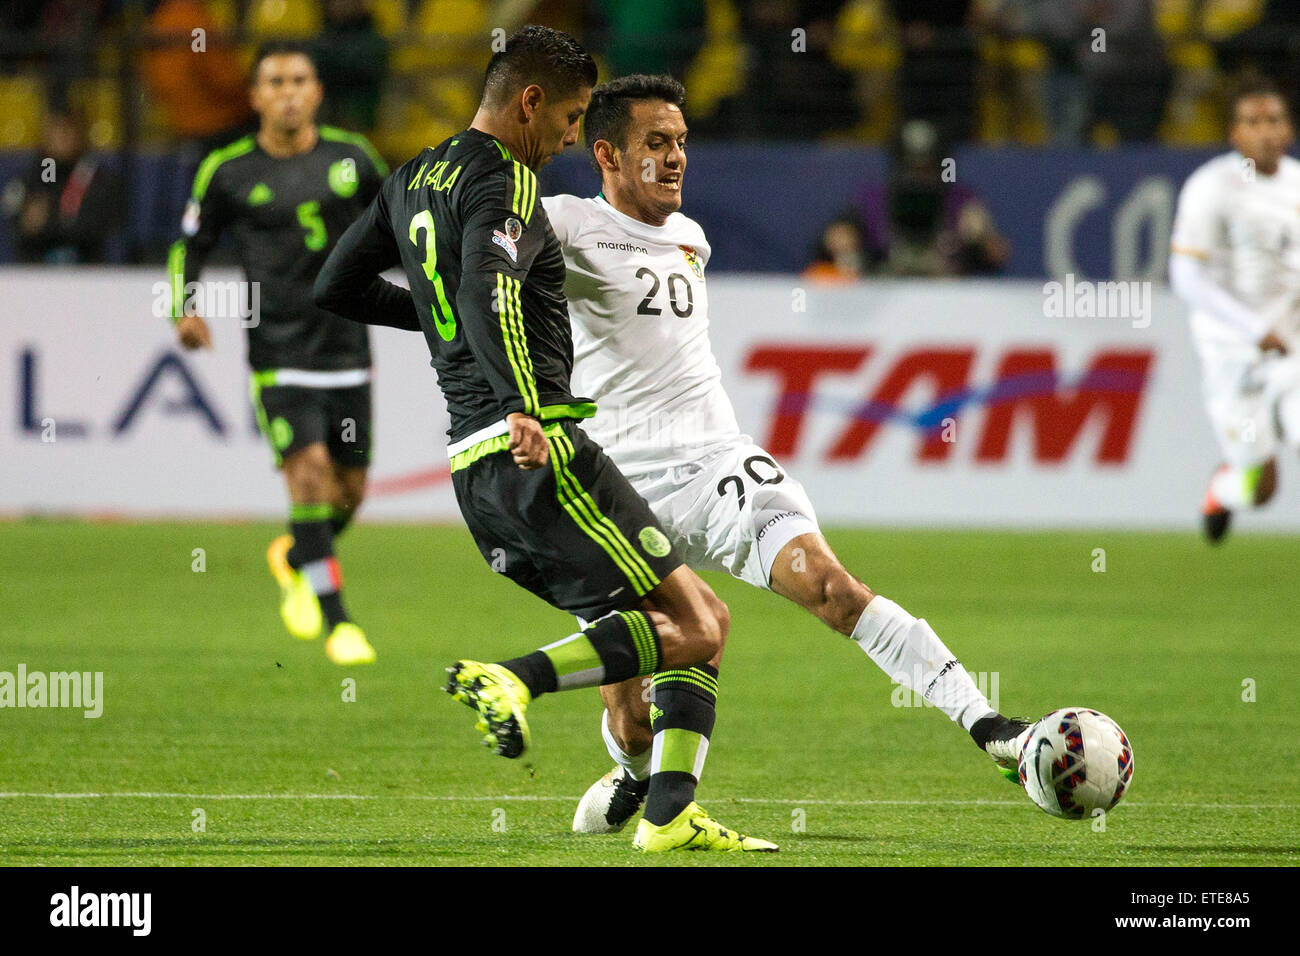 Vina Del Mar, Chile. 12th June, 2015. Mexico's Hugo Ayala (L) vies the ball with Bolivia's Jhasmani Campos (R) during the Group Phase match of the Copa America 2015, in the El Sausalito stadium, in Vina del Mar, Chile, on June 12, 2015. Credit:  Luis Echeverria/Xinhua/Alamy Live News Stock Photo